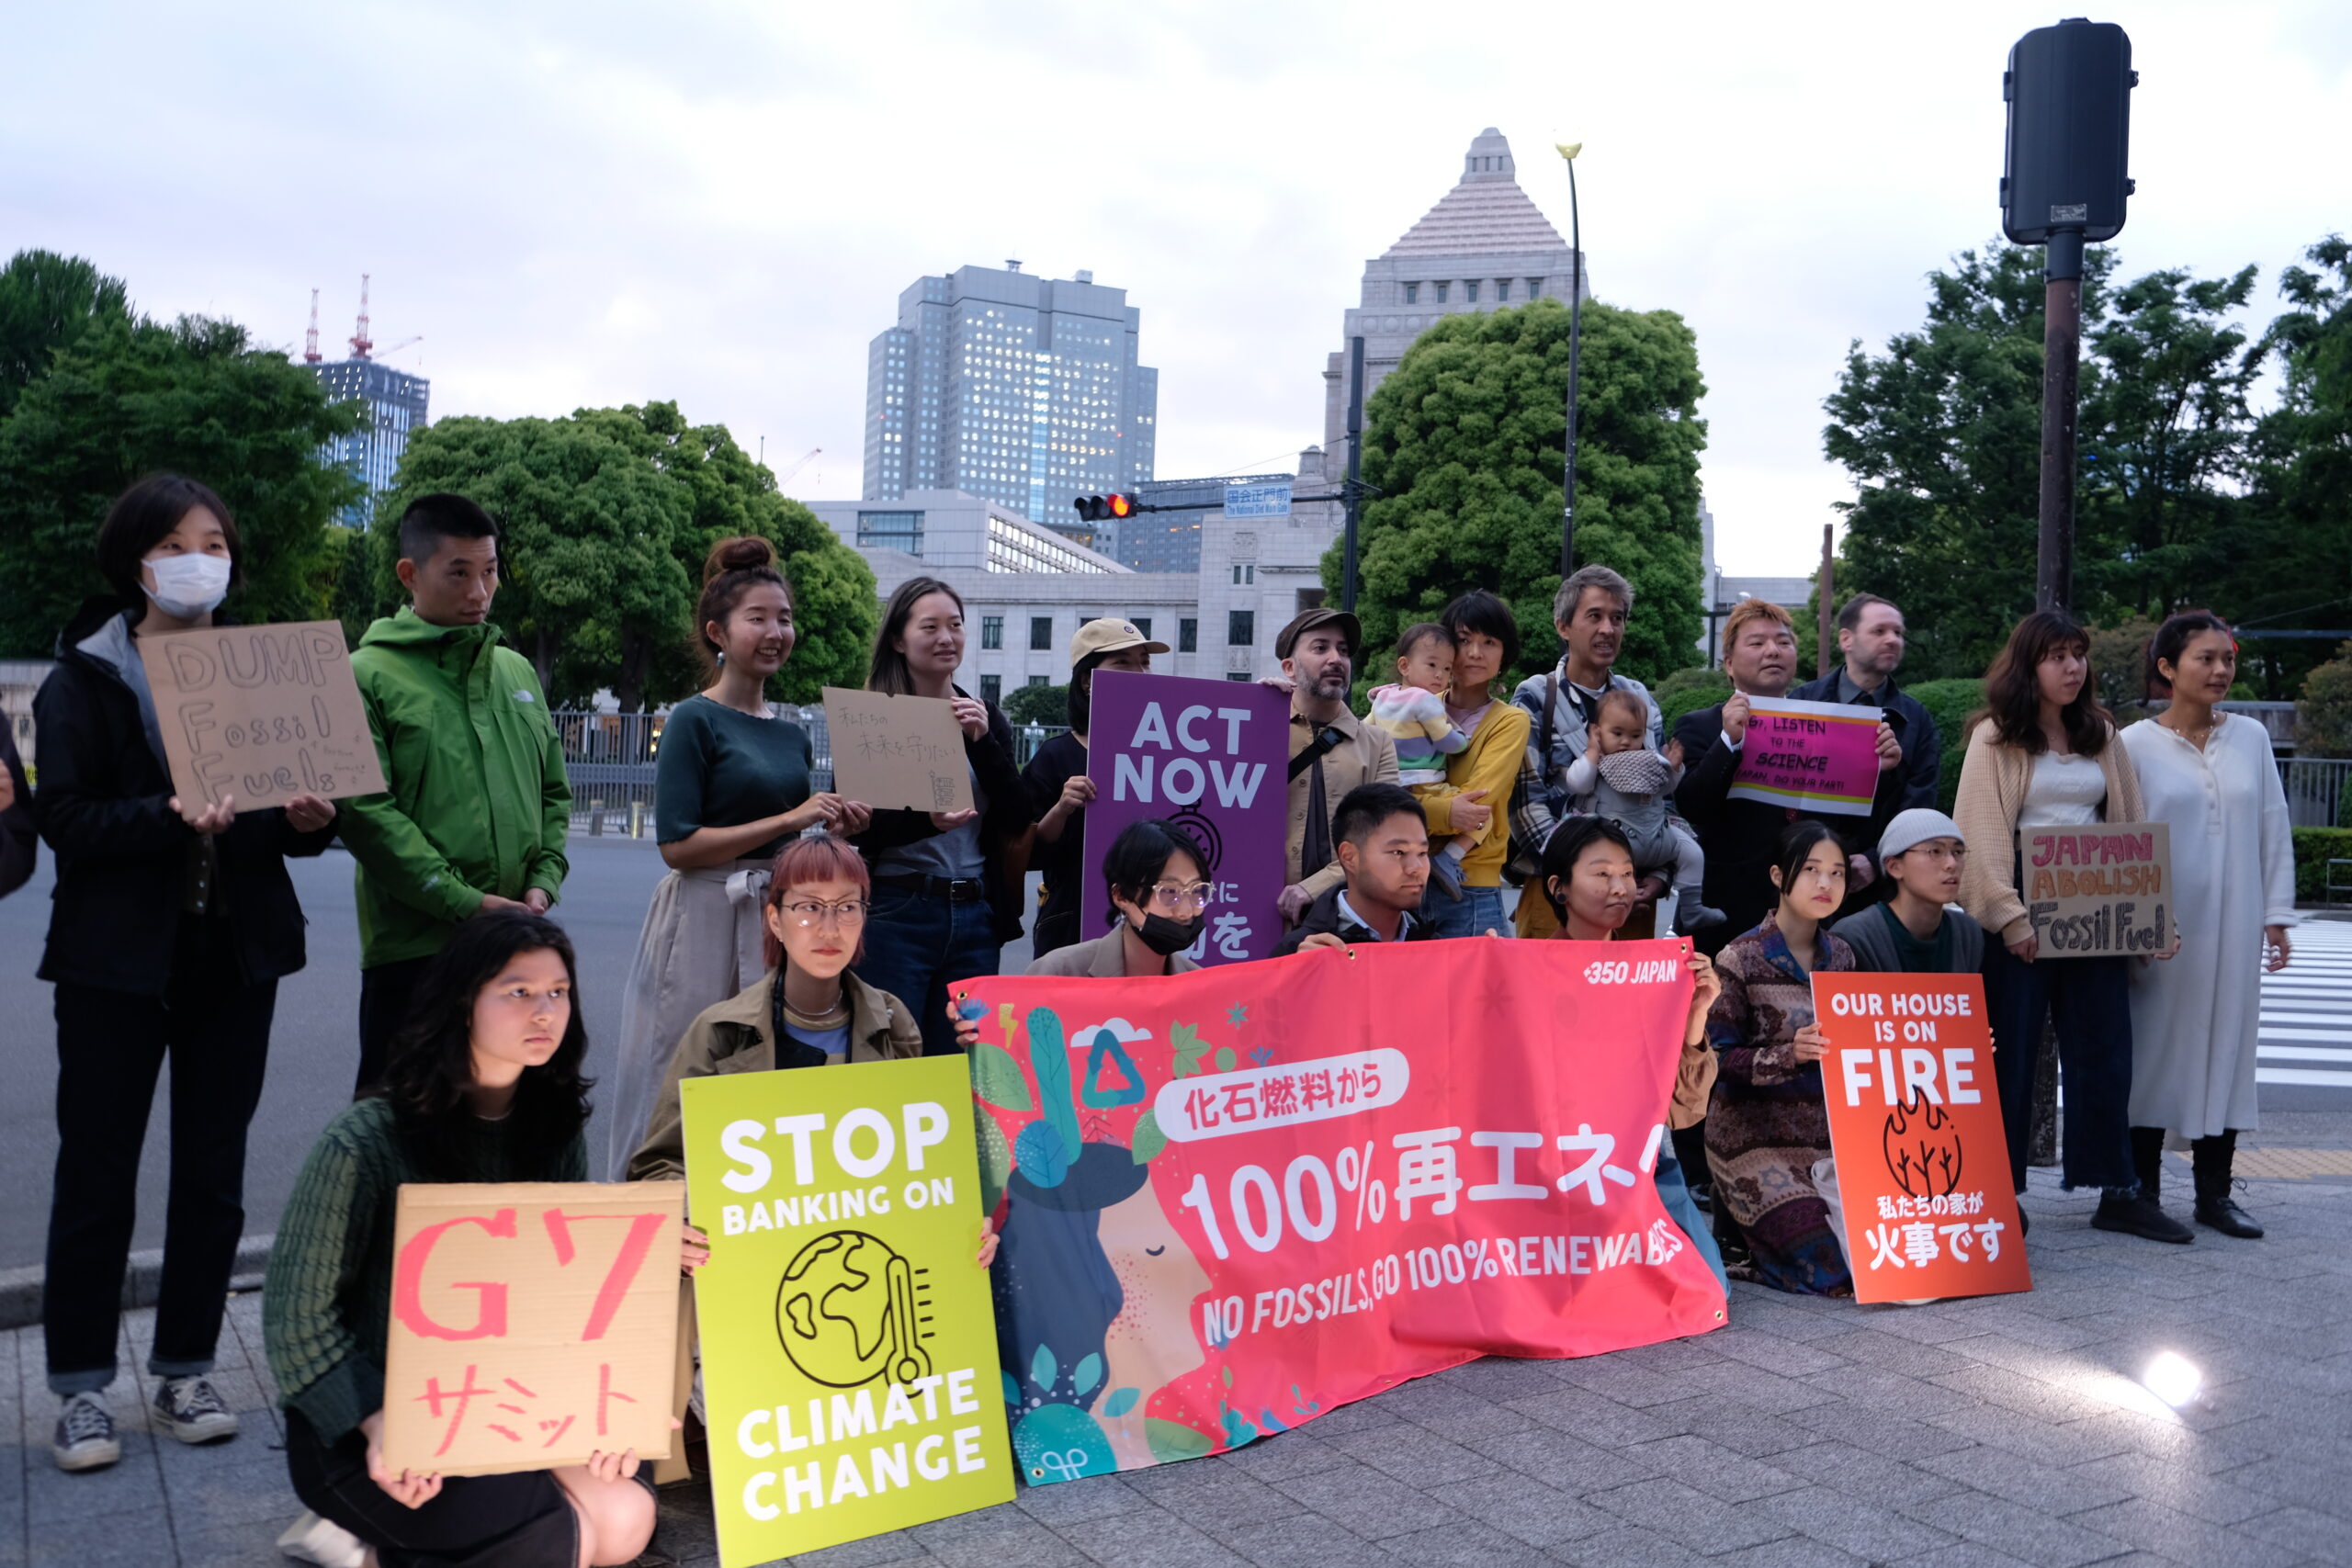 Groups Pressure Japan, Biden to Oppose Global LNG Expansion + Stop G7 Push for Fossil Finance